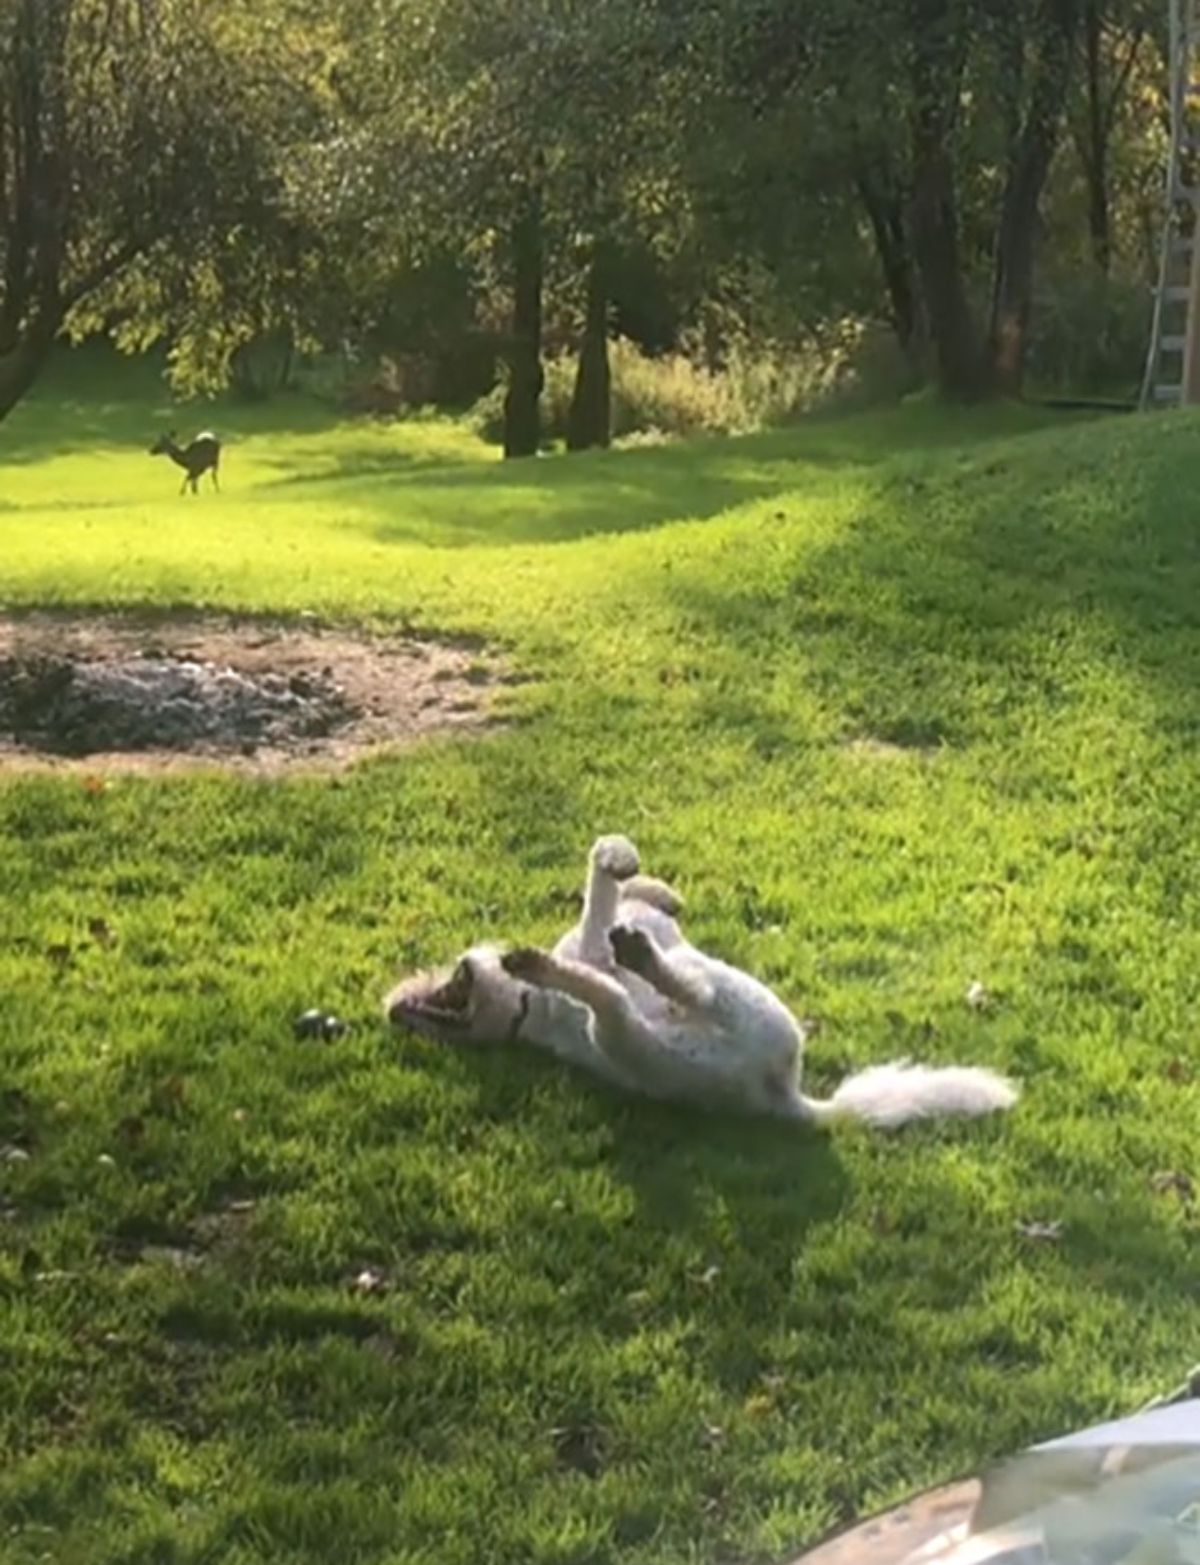 white dog laying upside down on grass playing with a toy with a deer in the background